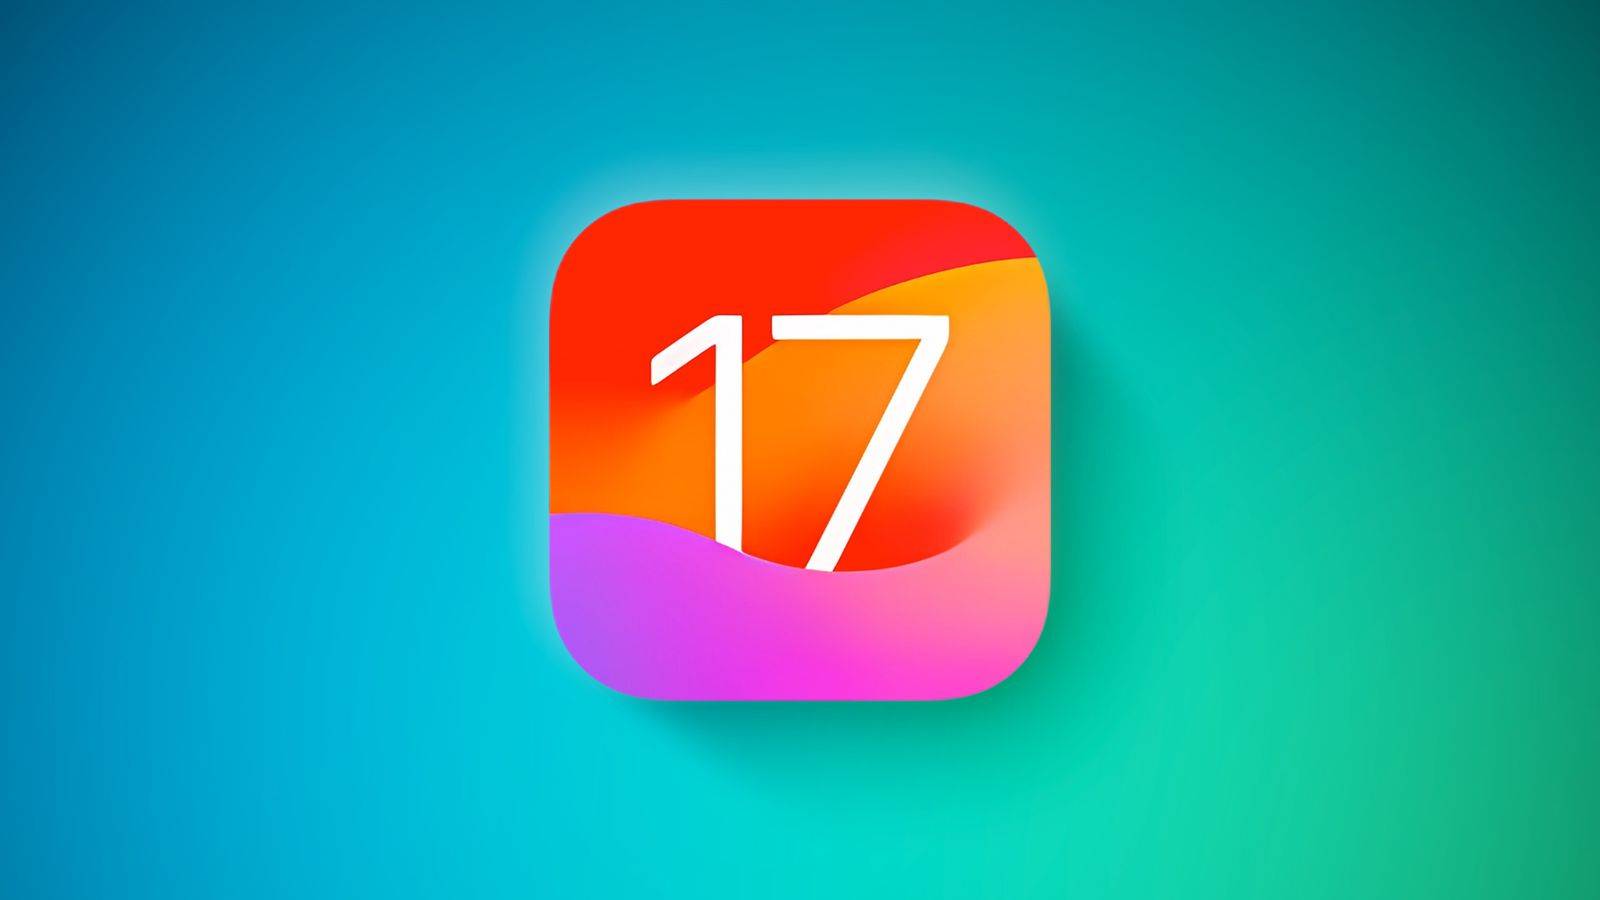 iOS 17.1 release October 24 iPhone 12 radiation France